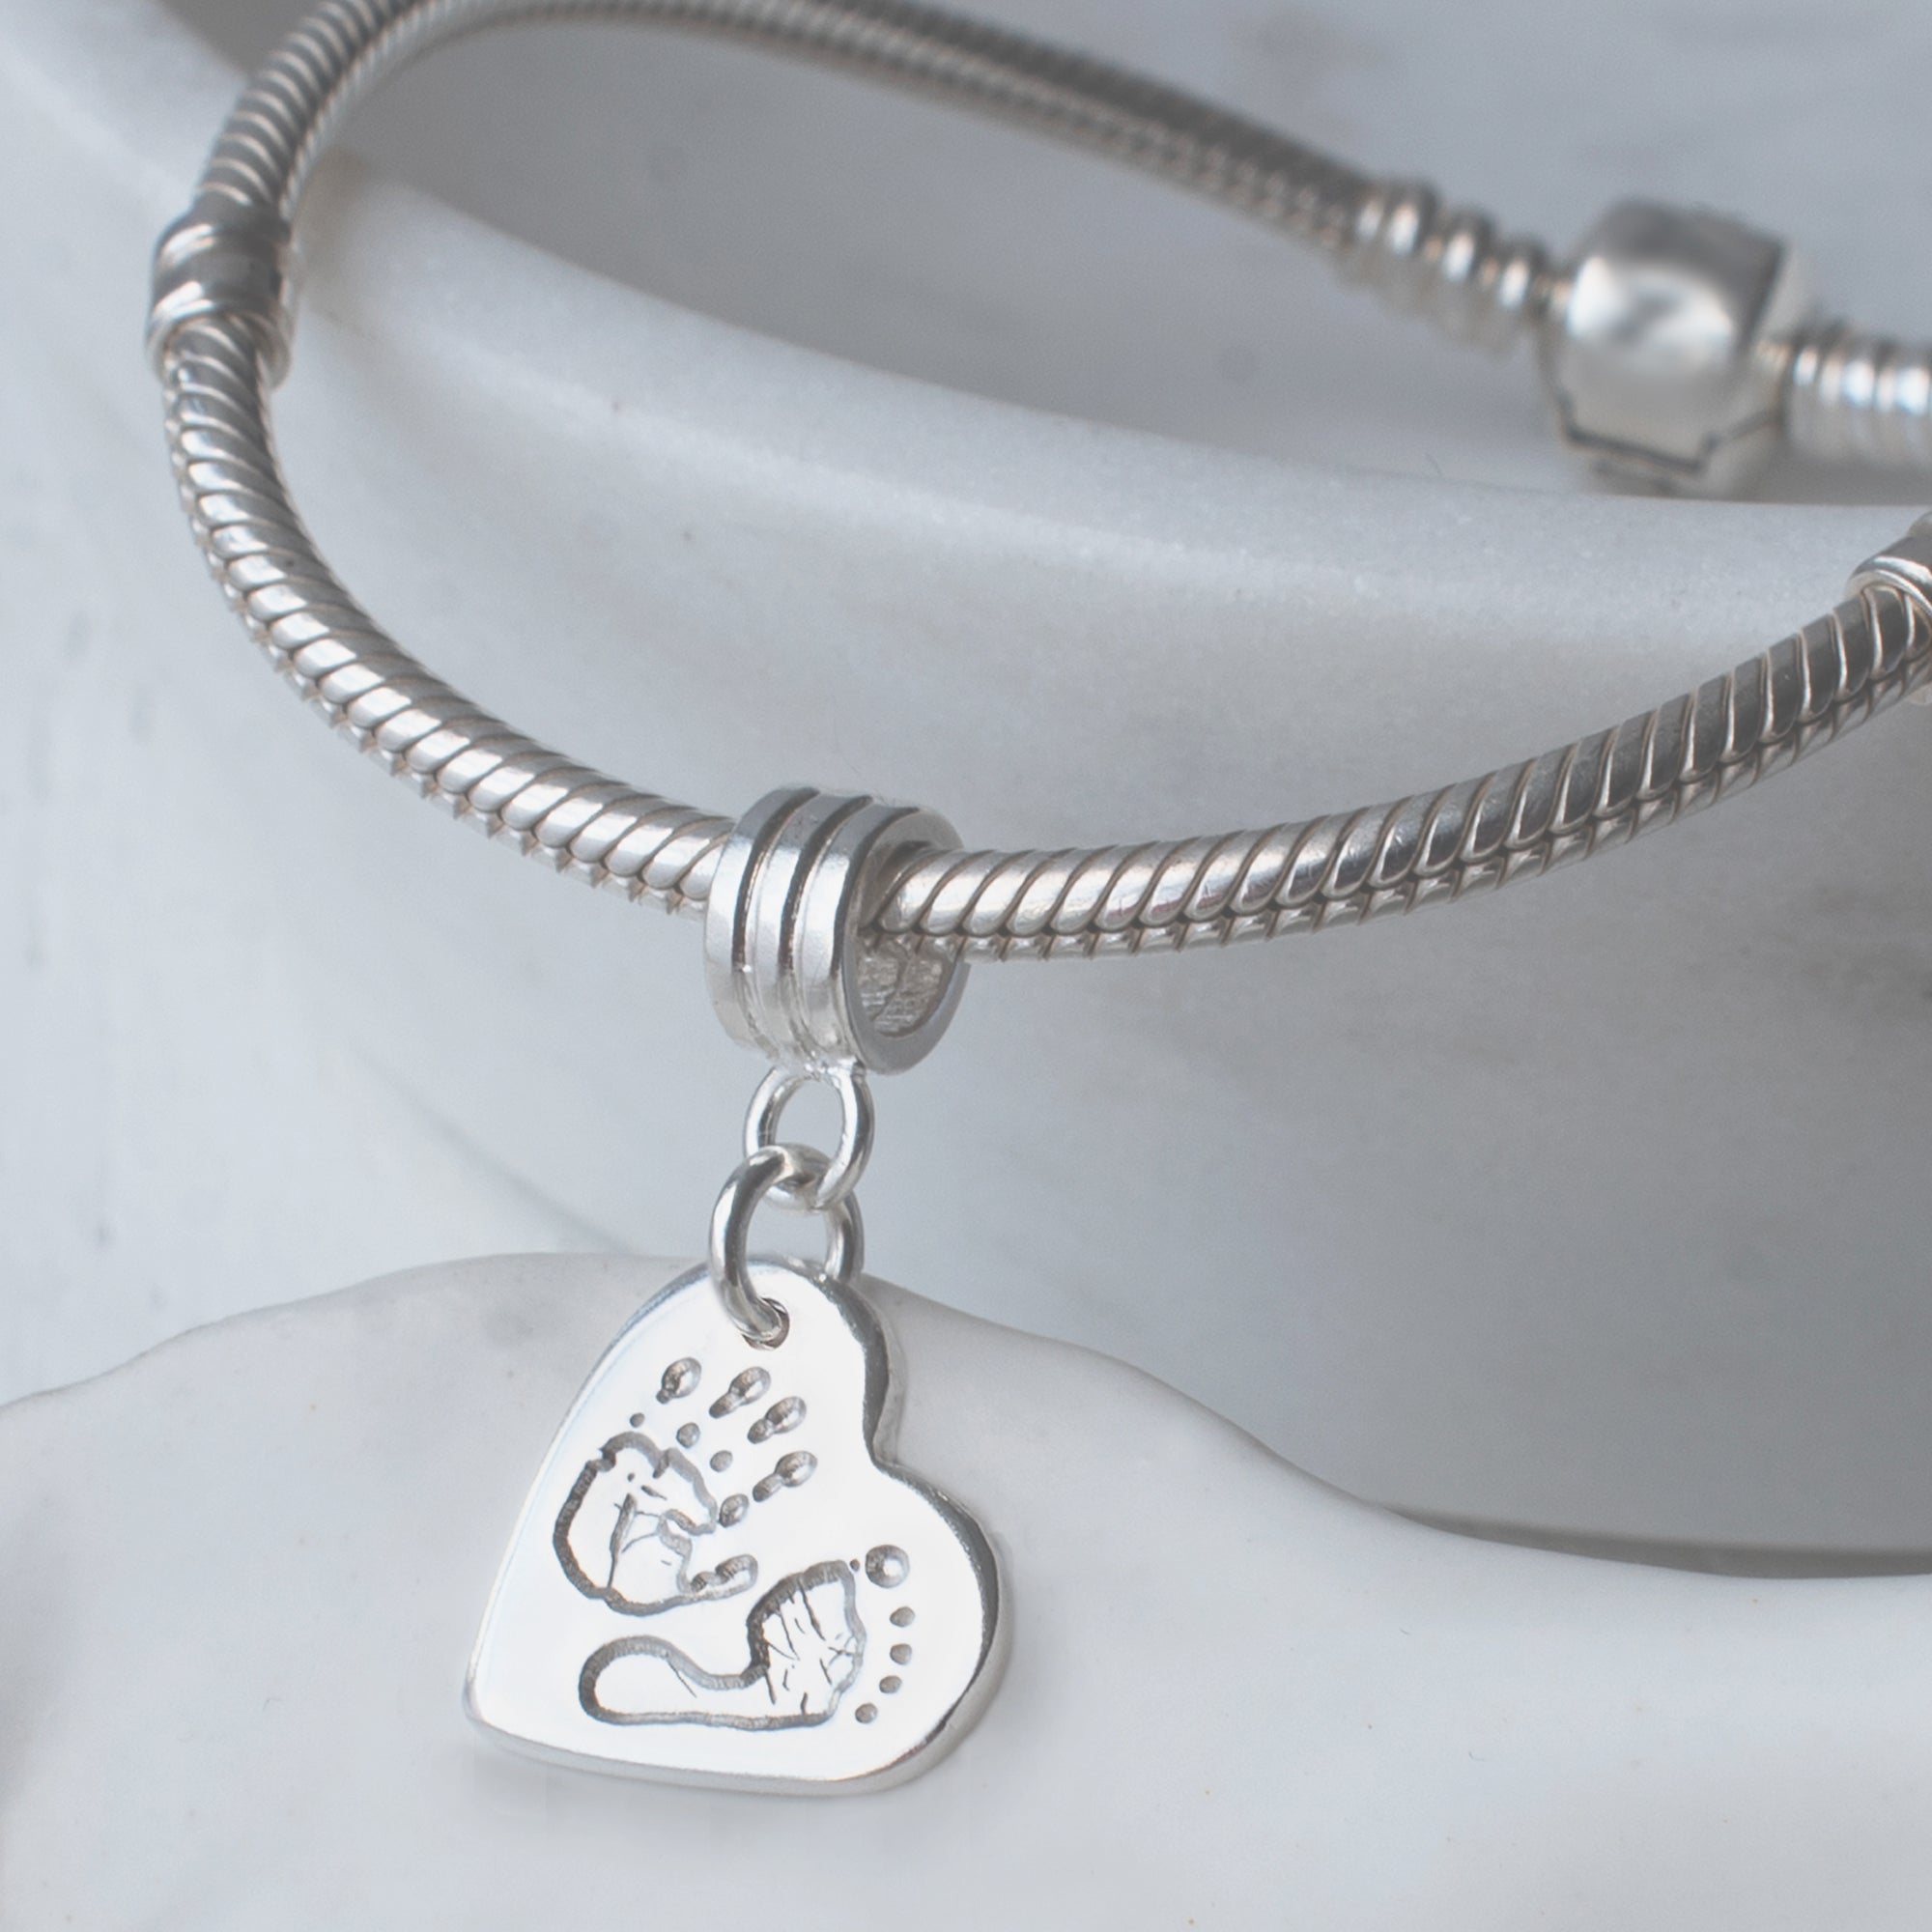 Baby's Handprint and Footprint Heart Charm with Carrier Bead (fits pandora style jewellery)